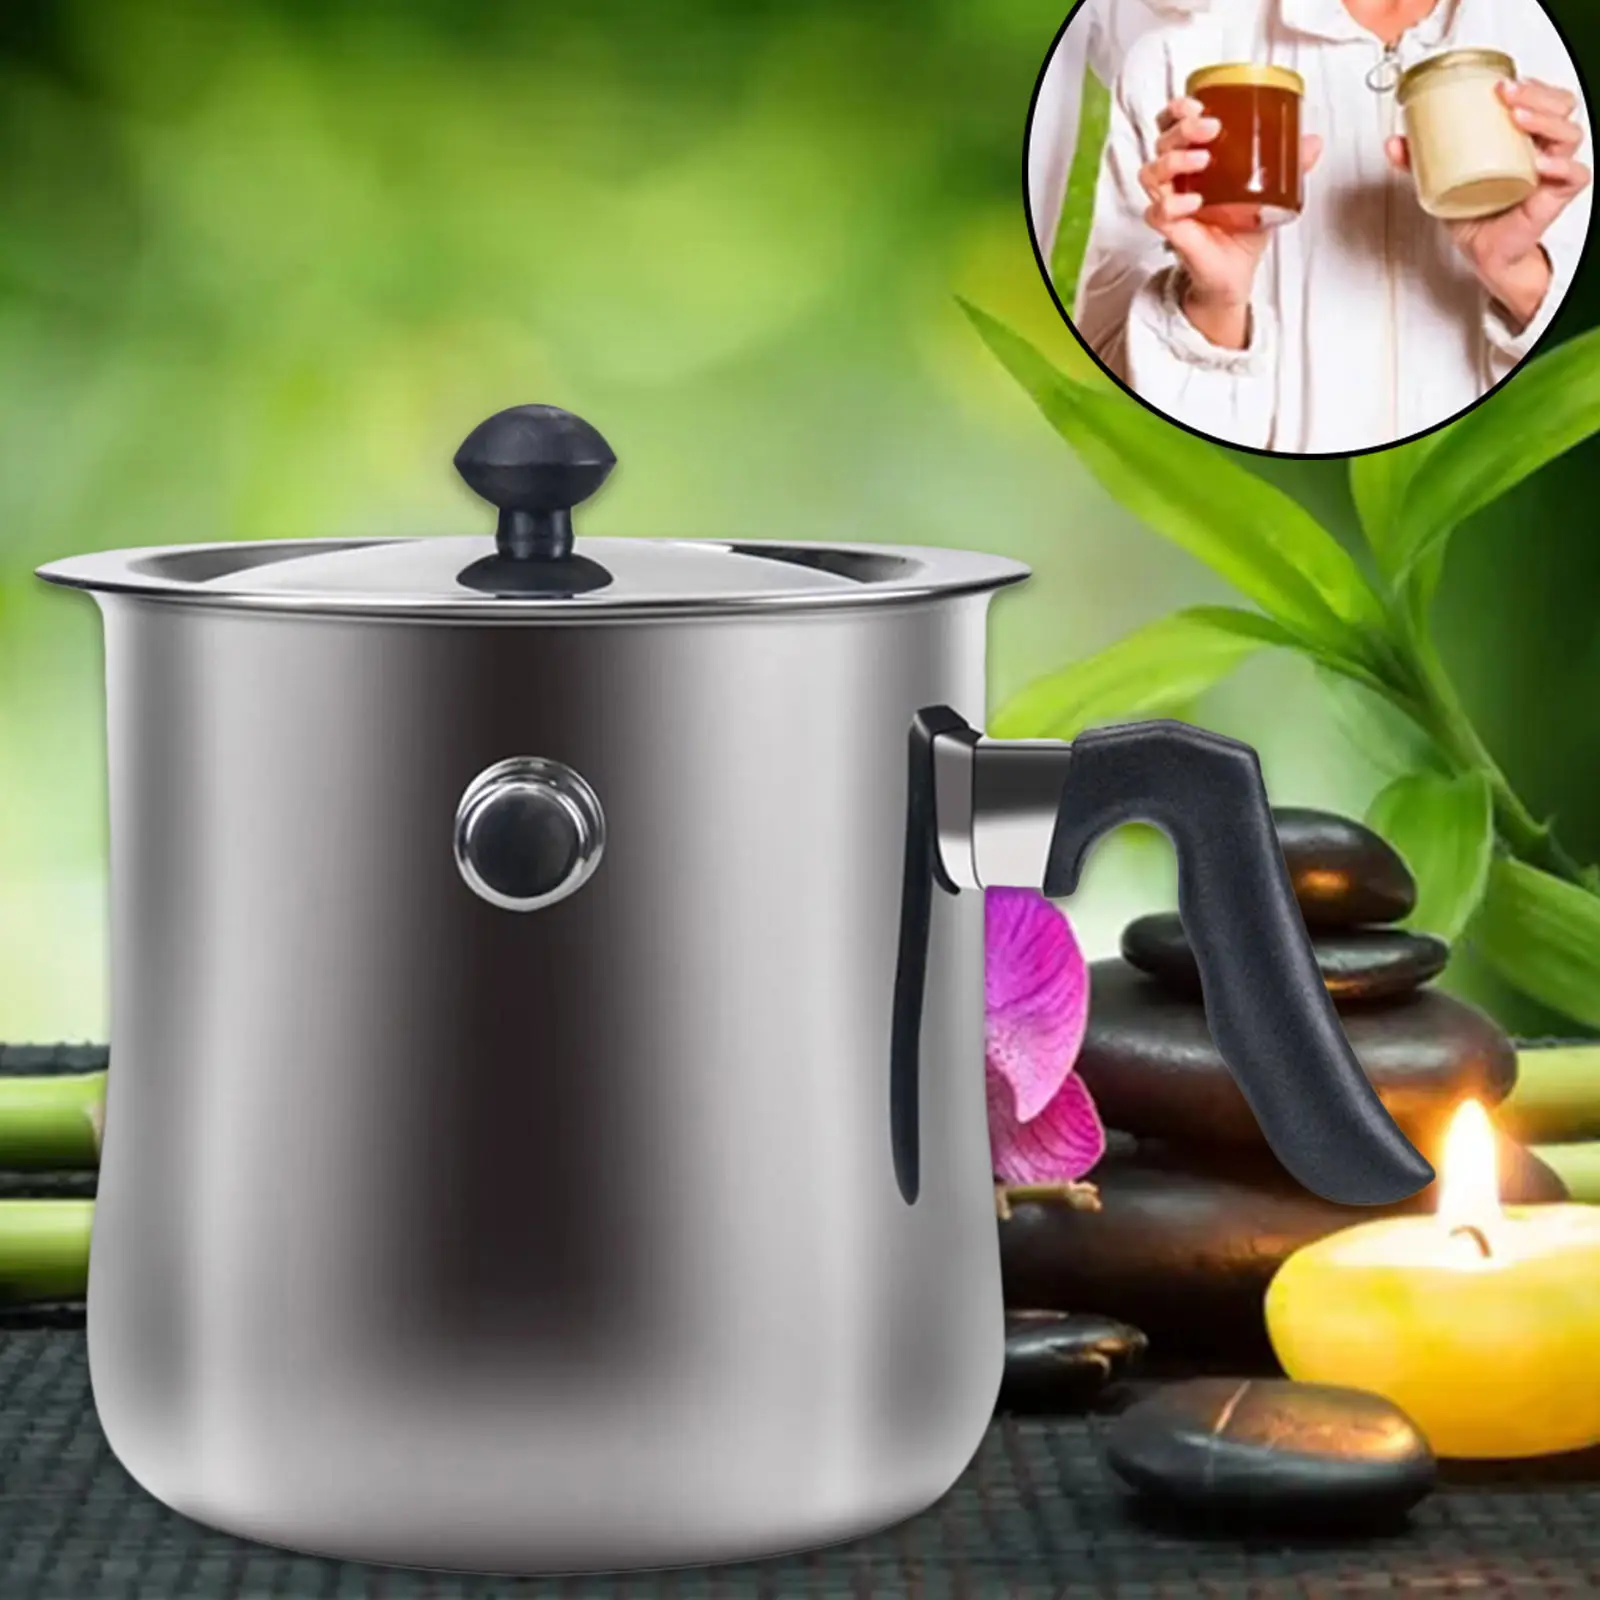 Double Boiler Wax Melting Pouring Pot Cup Pitcher for DIY Candle Soap Making